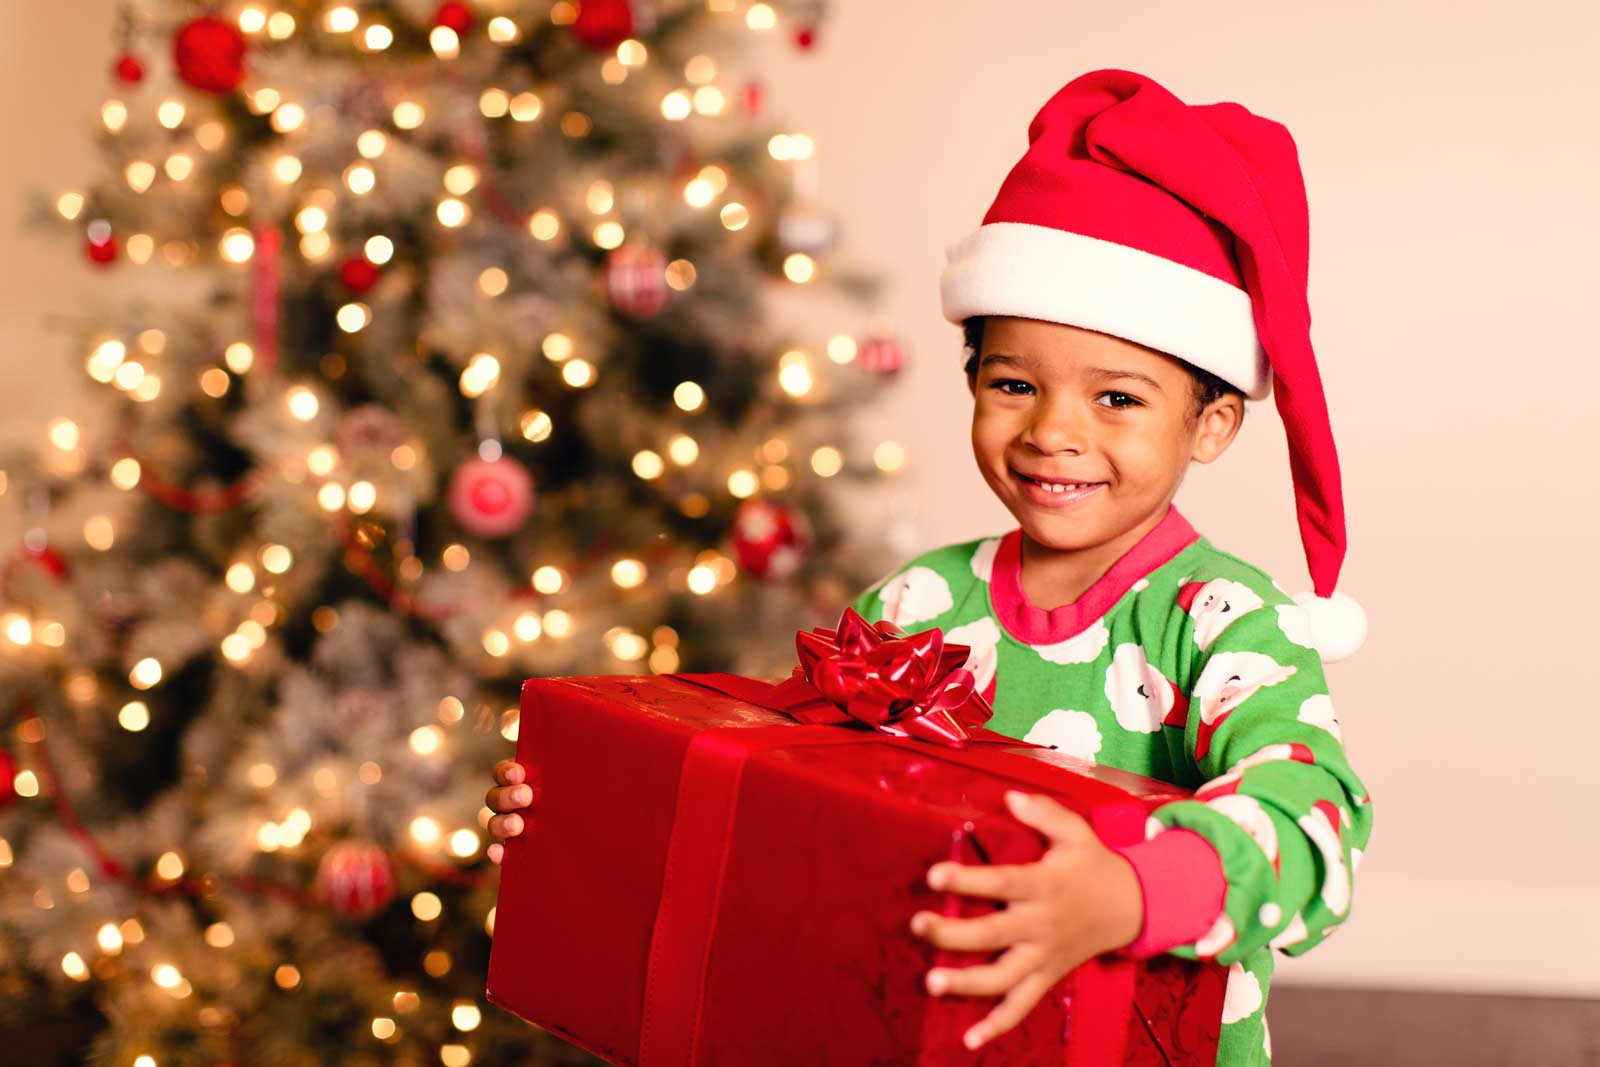 happy child with Santa hat holding gift